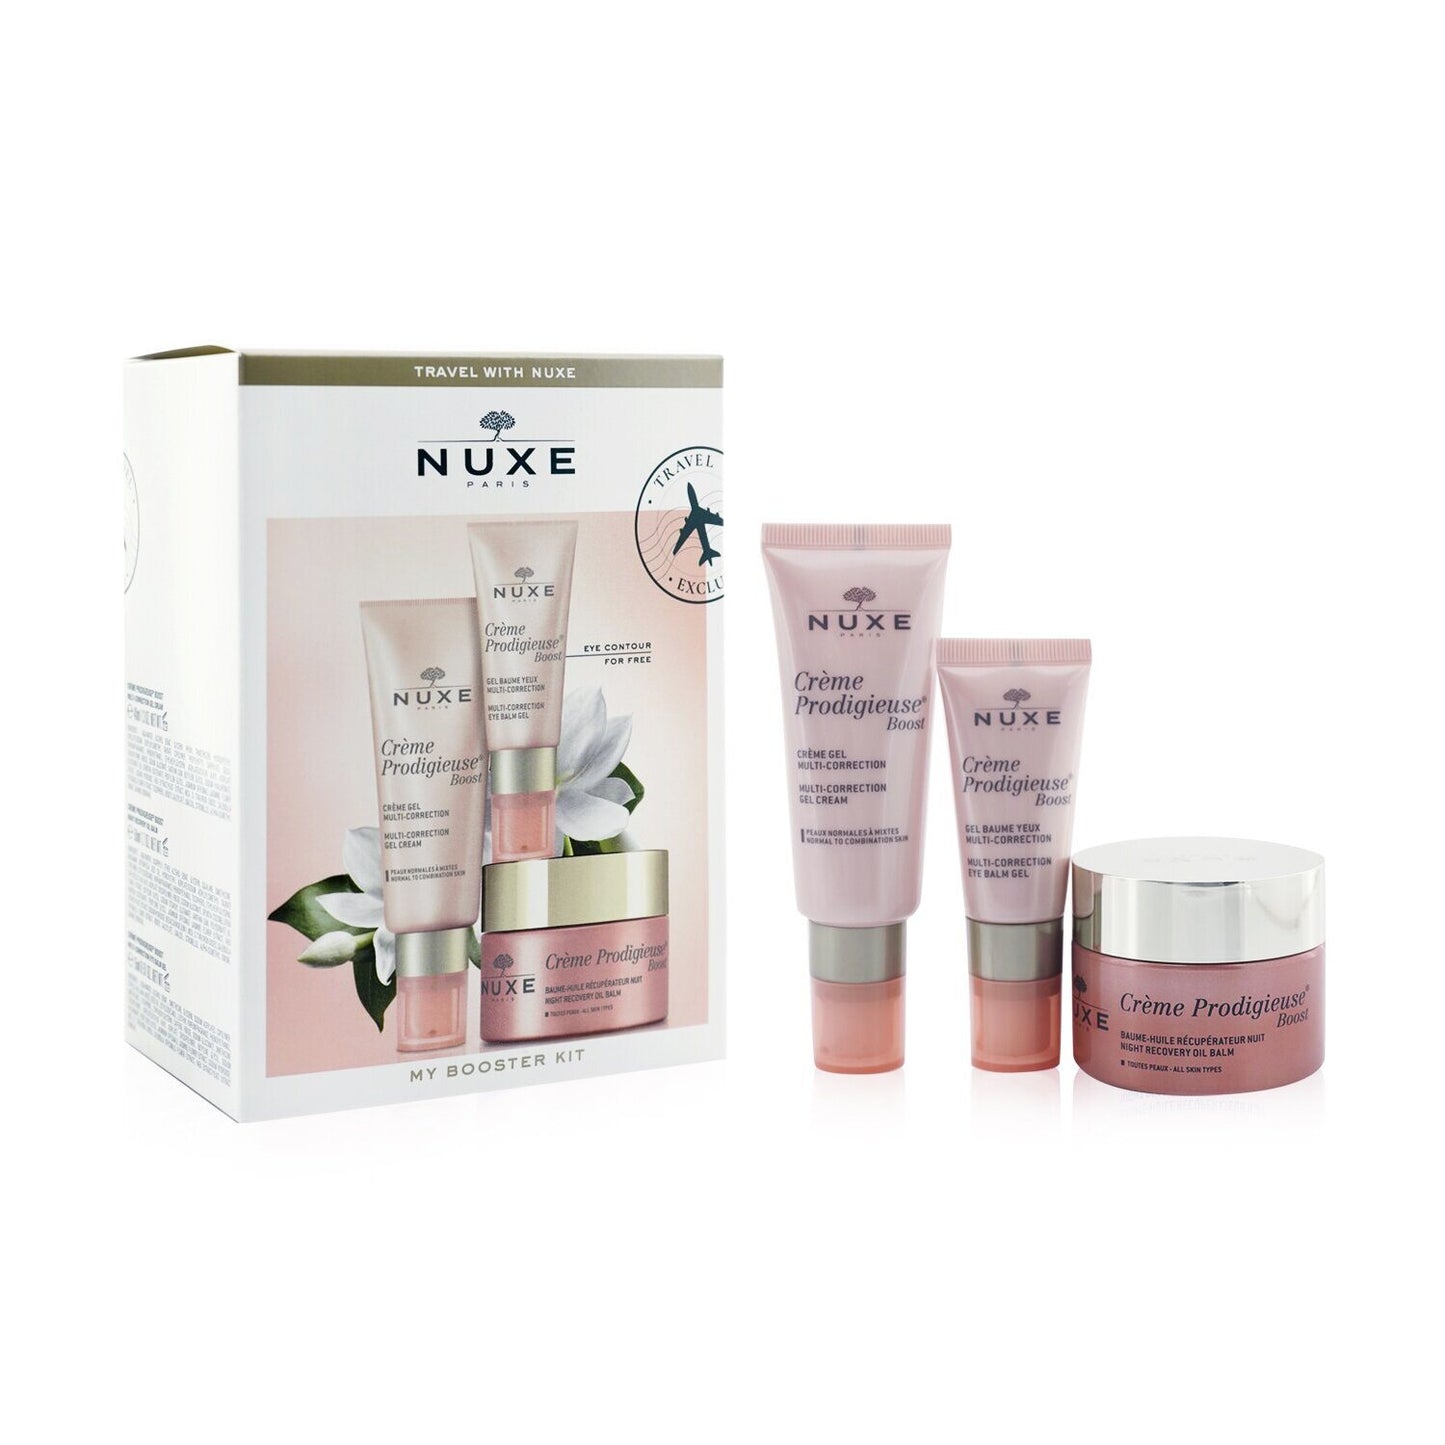 NUXE - My Booster Kit: Creme Prodigieuse Boost Gel Cream 40ml + Creme Prodigieuse Boost Eye Balm Gel 15ml + Creme Prodigieuse Boost  3pcs - lolaluxeshop